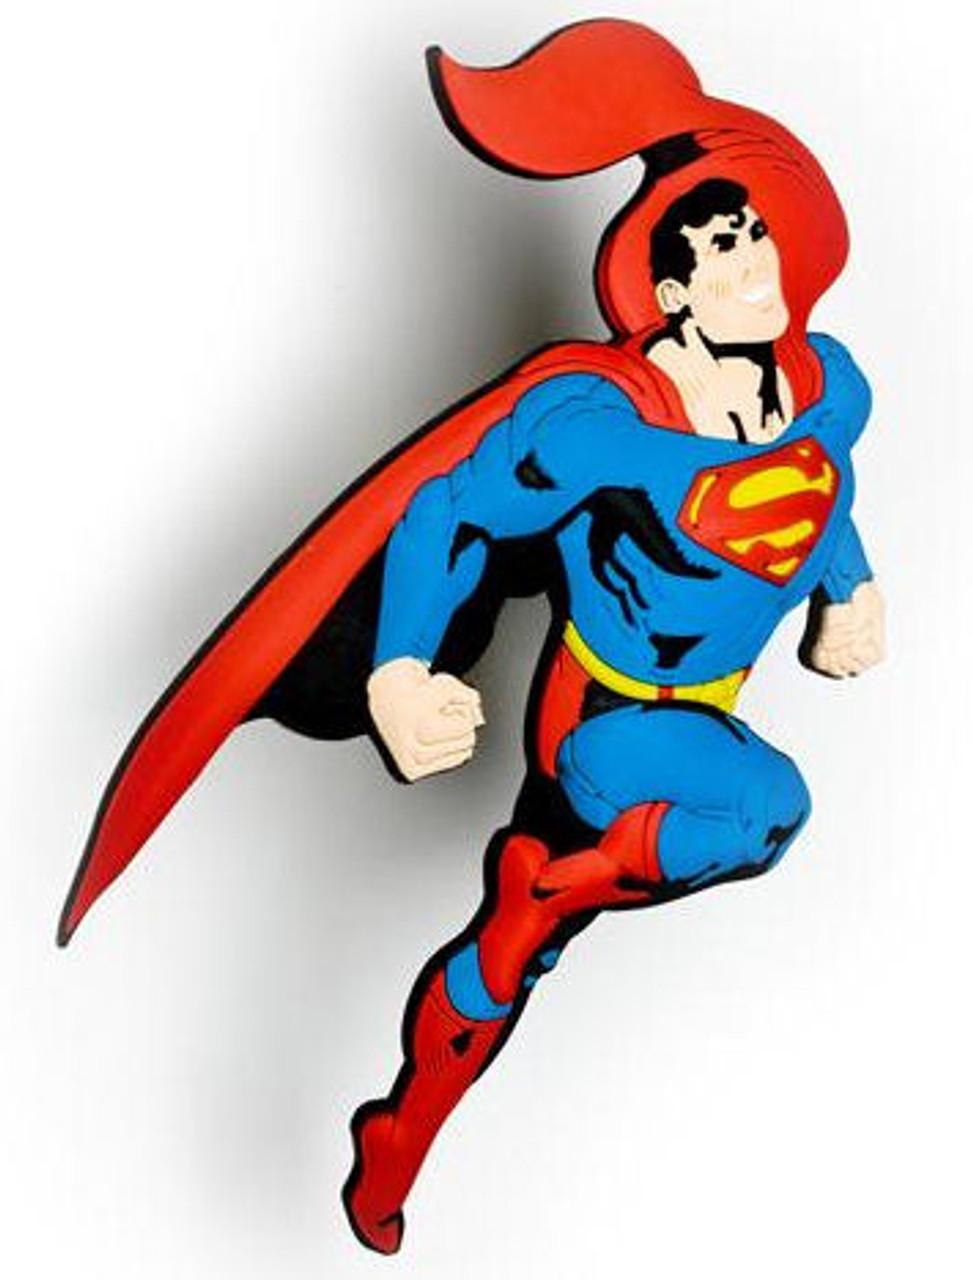 superman animated series png - Clip Art Library